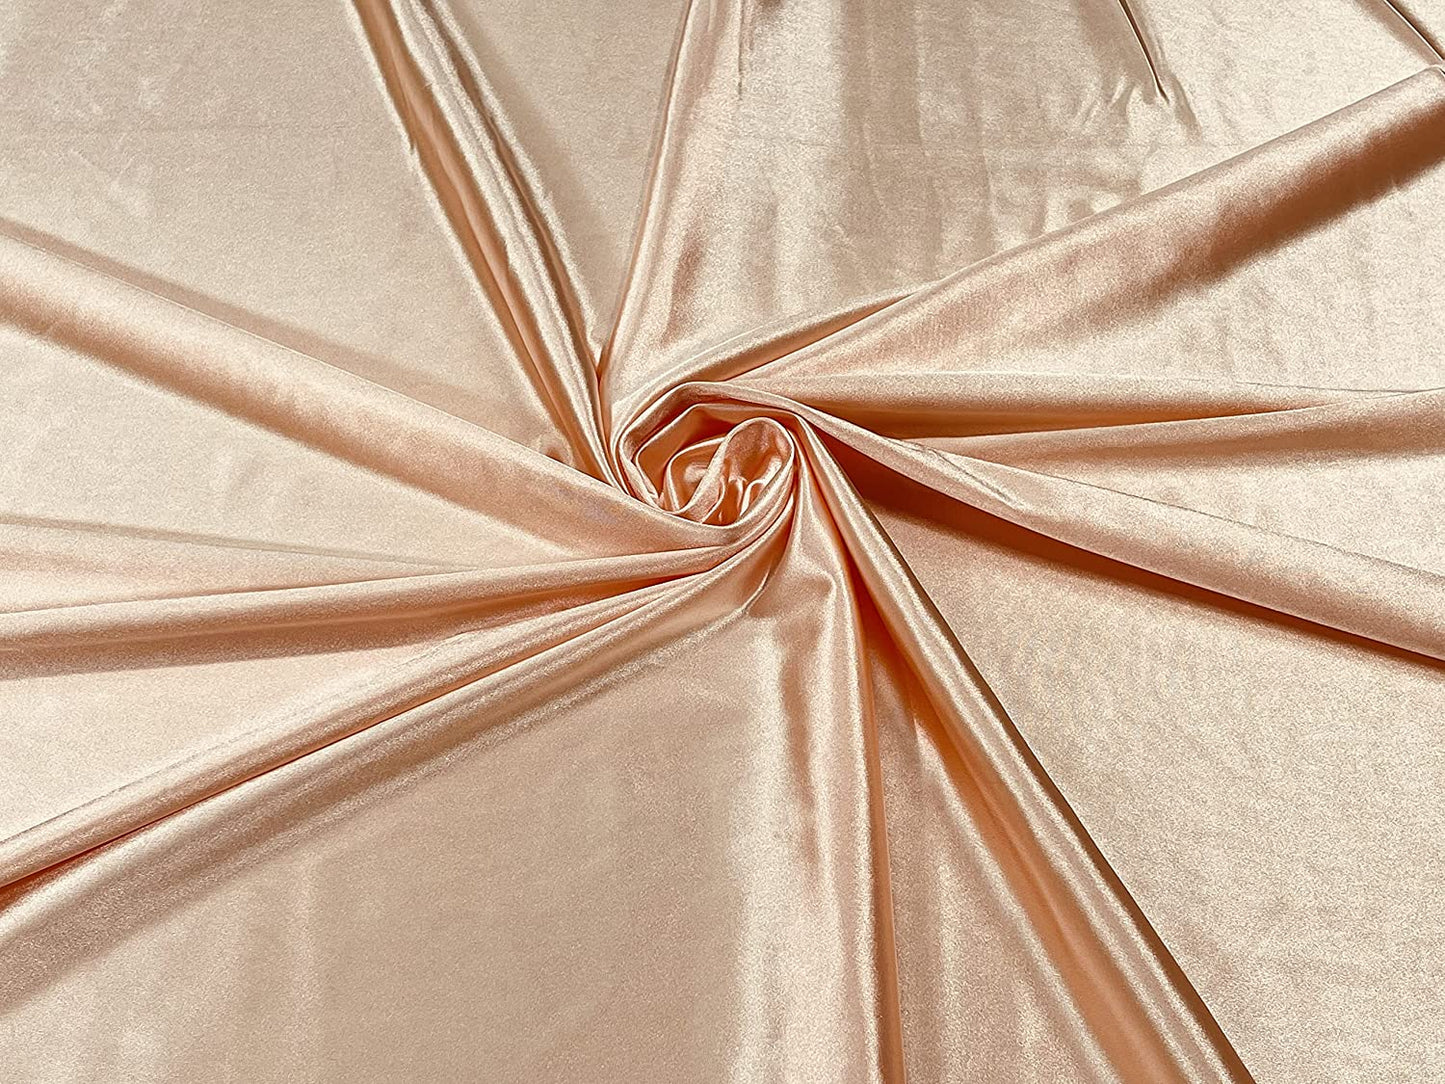 Deluxe Shiny Polyester Spandex Stretch Fabric (1 Yard, Peach)